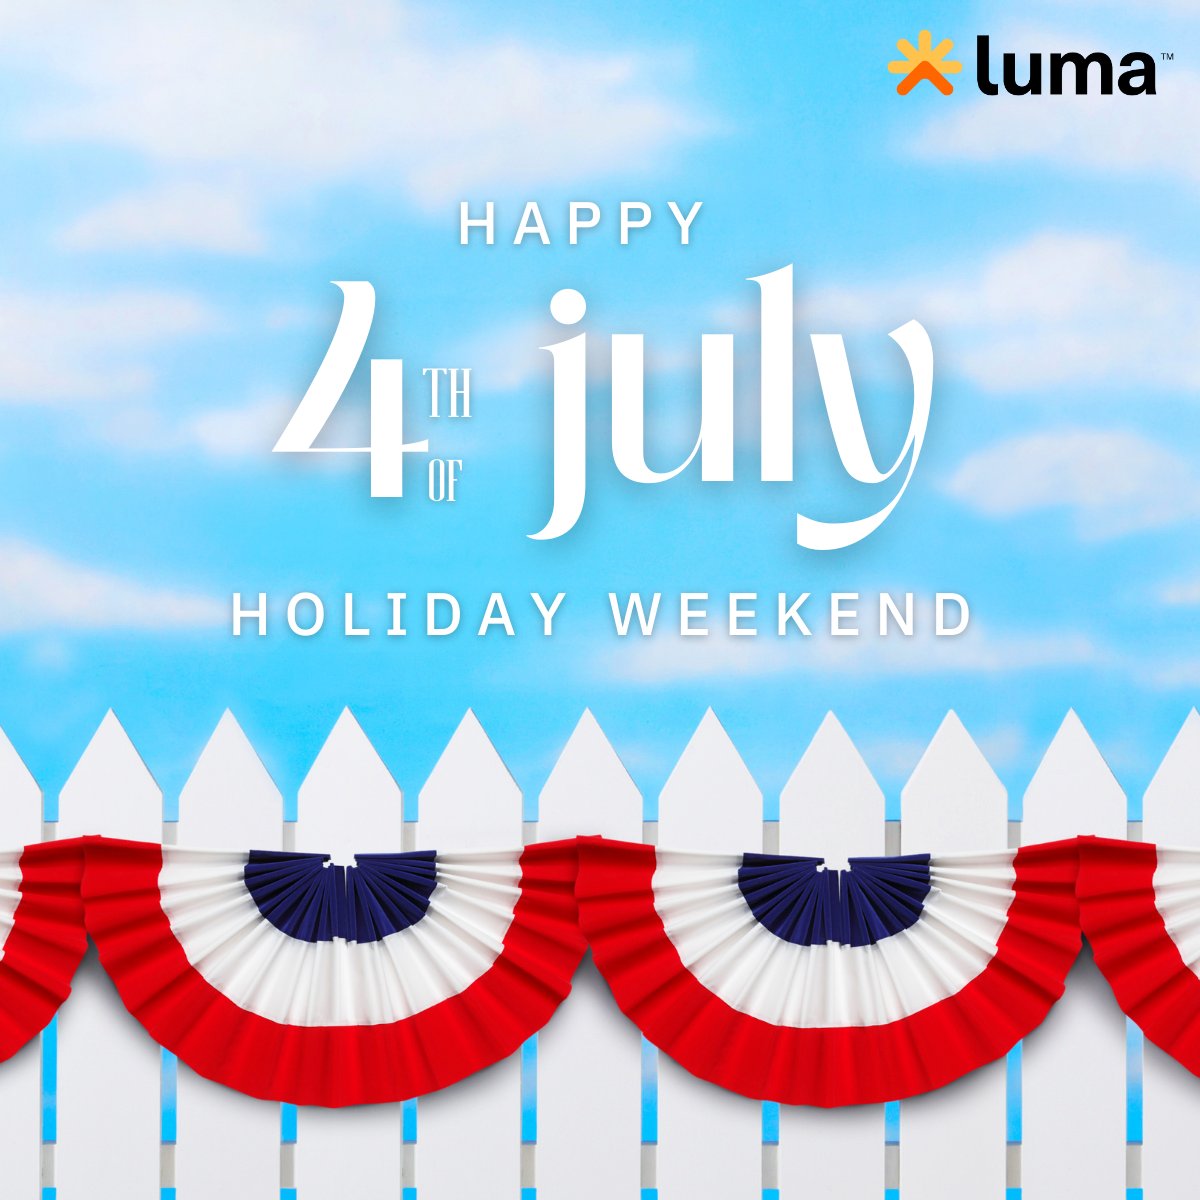 From our families to yours, wishing you a safe and happy holiday weekend! (As our dermatology customers often remind us, don't forget the sunscreen! ☀️)